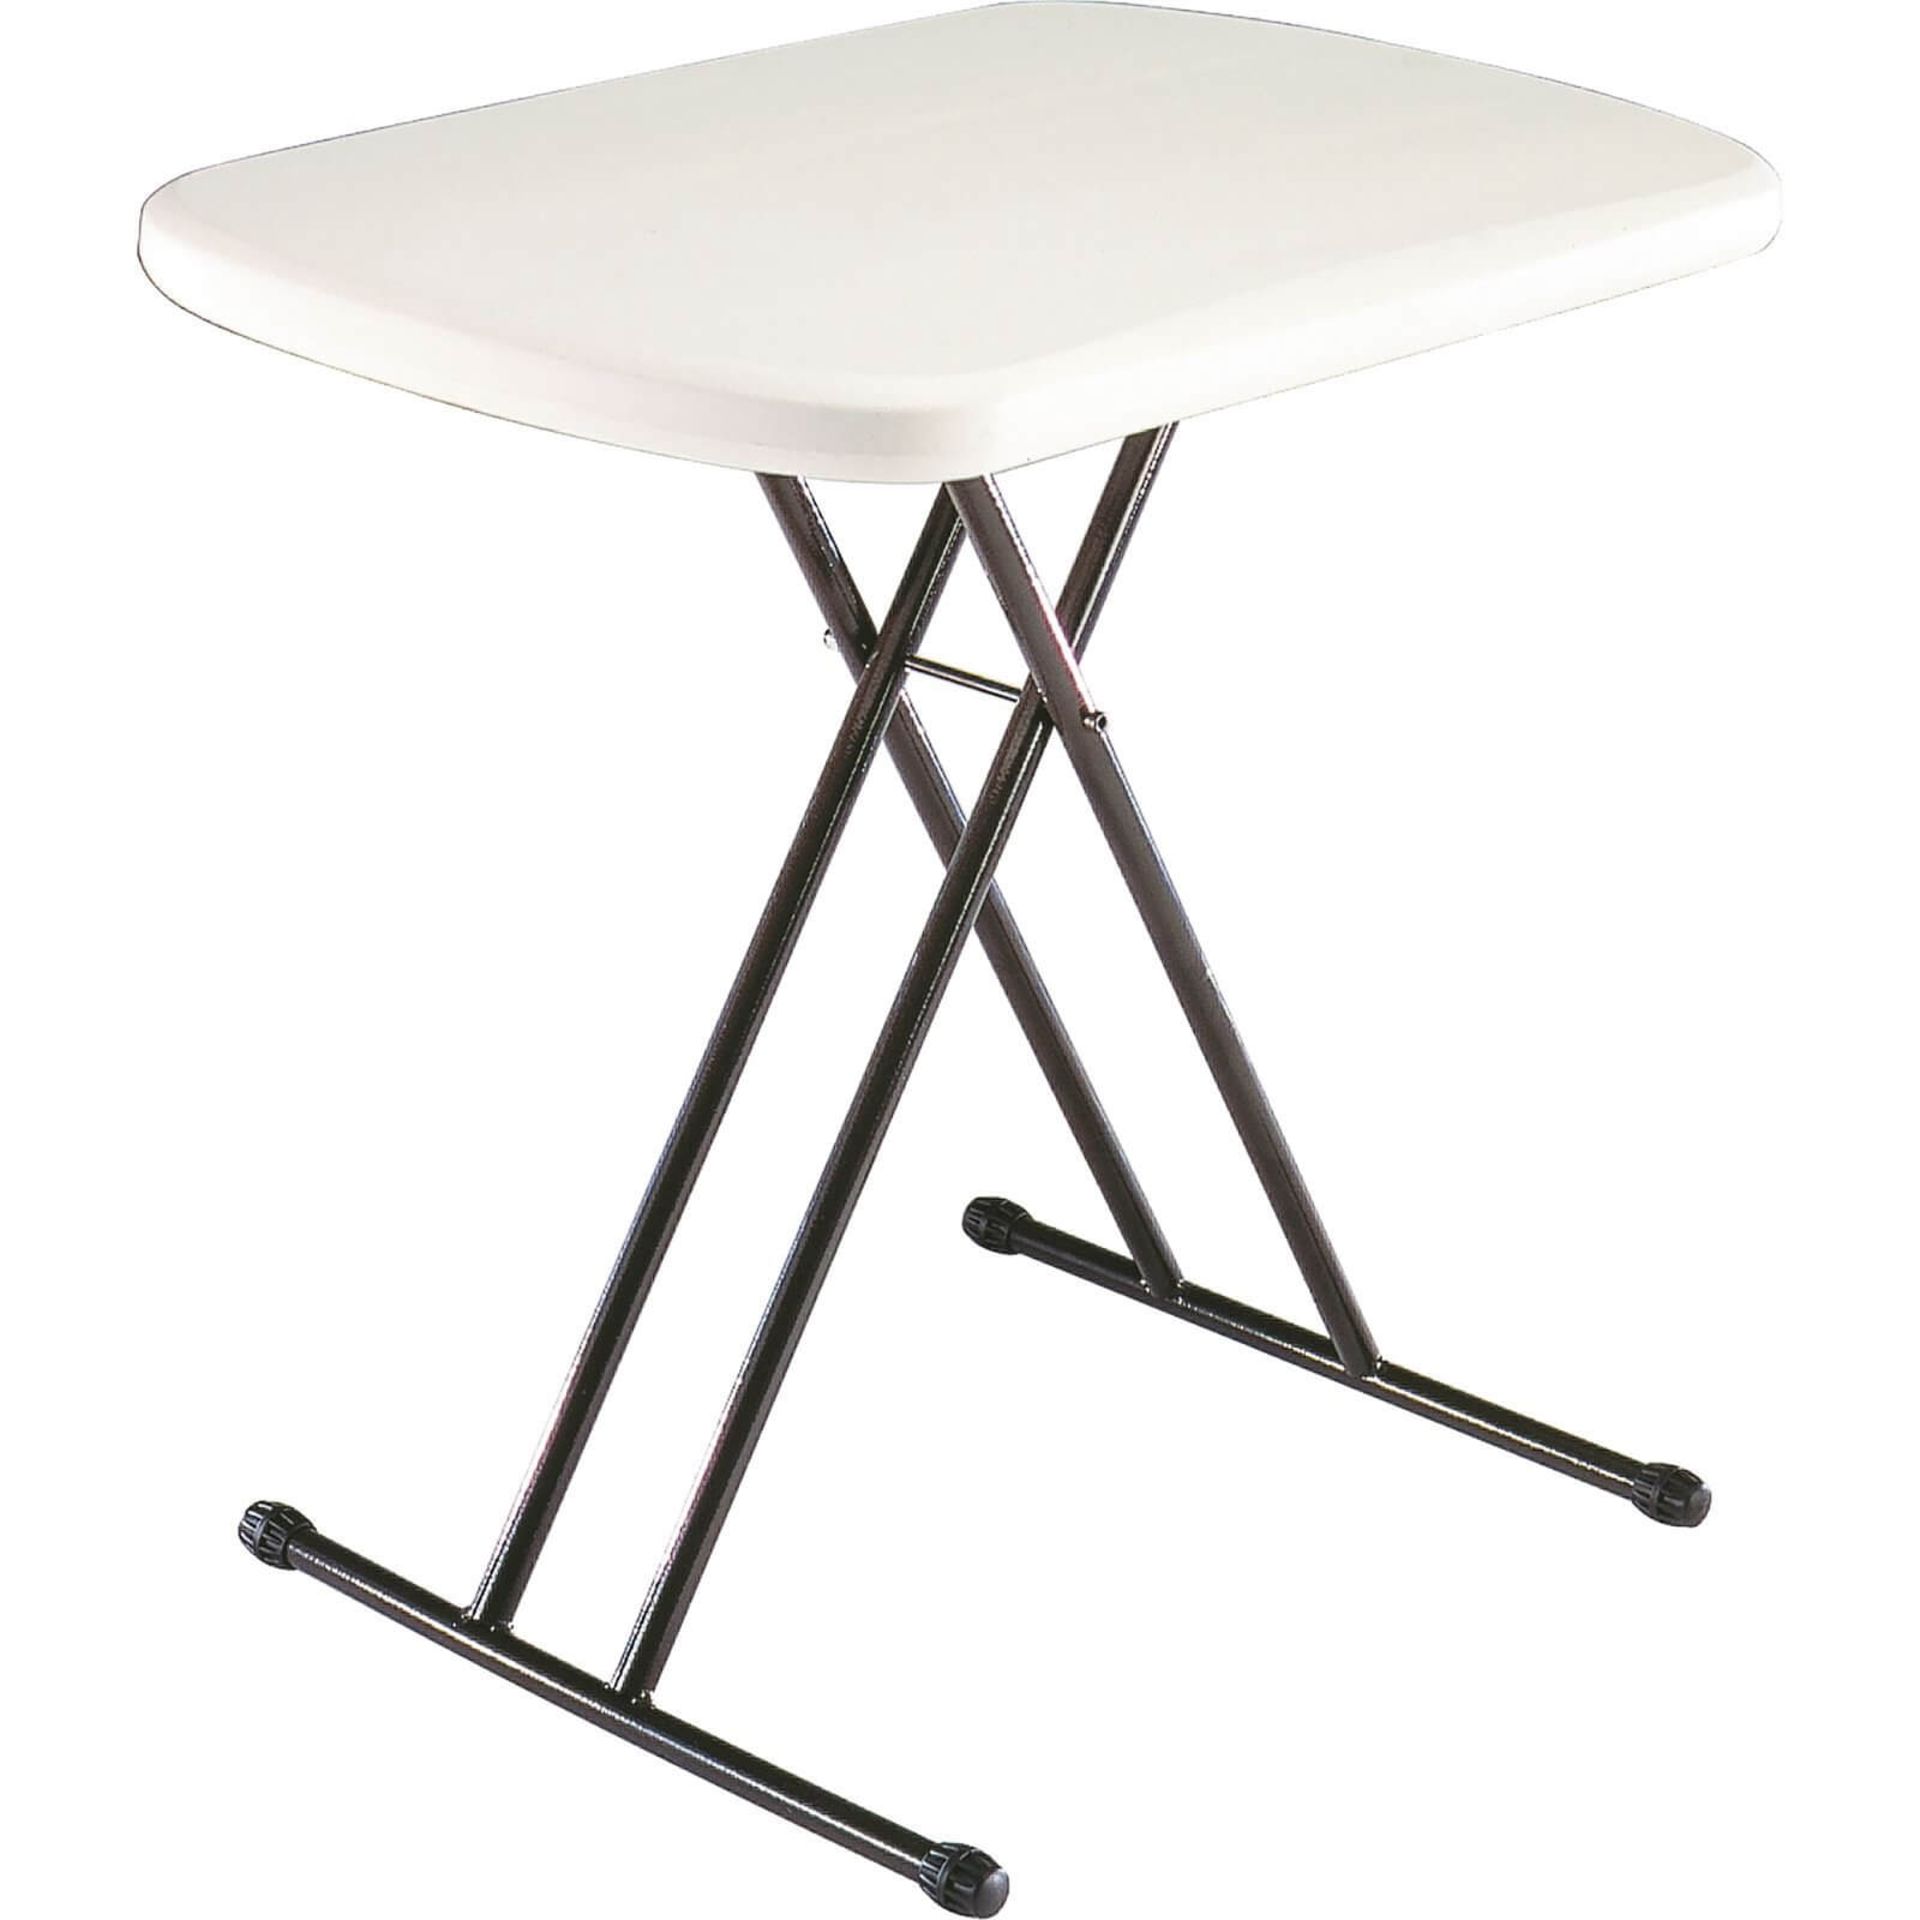 (R7H) 4 X Lifetime 658mm Personal Table (Appears New) - Image 2 of 5